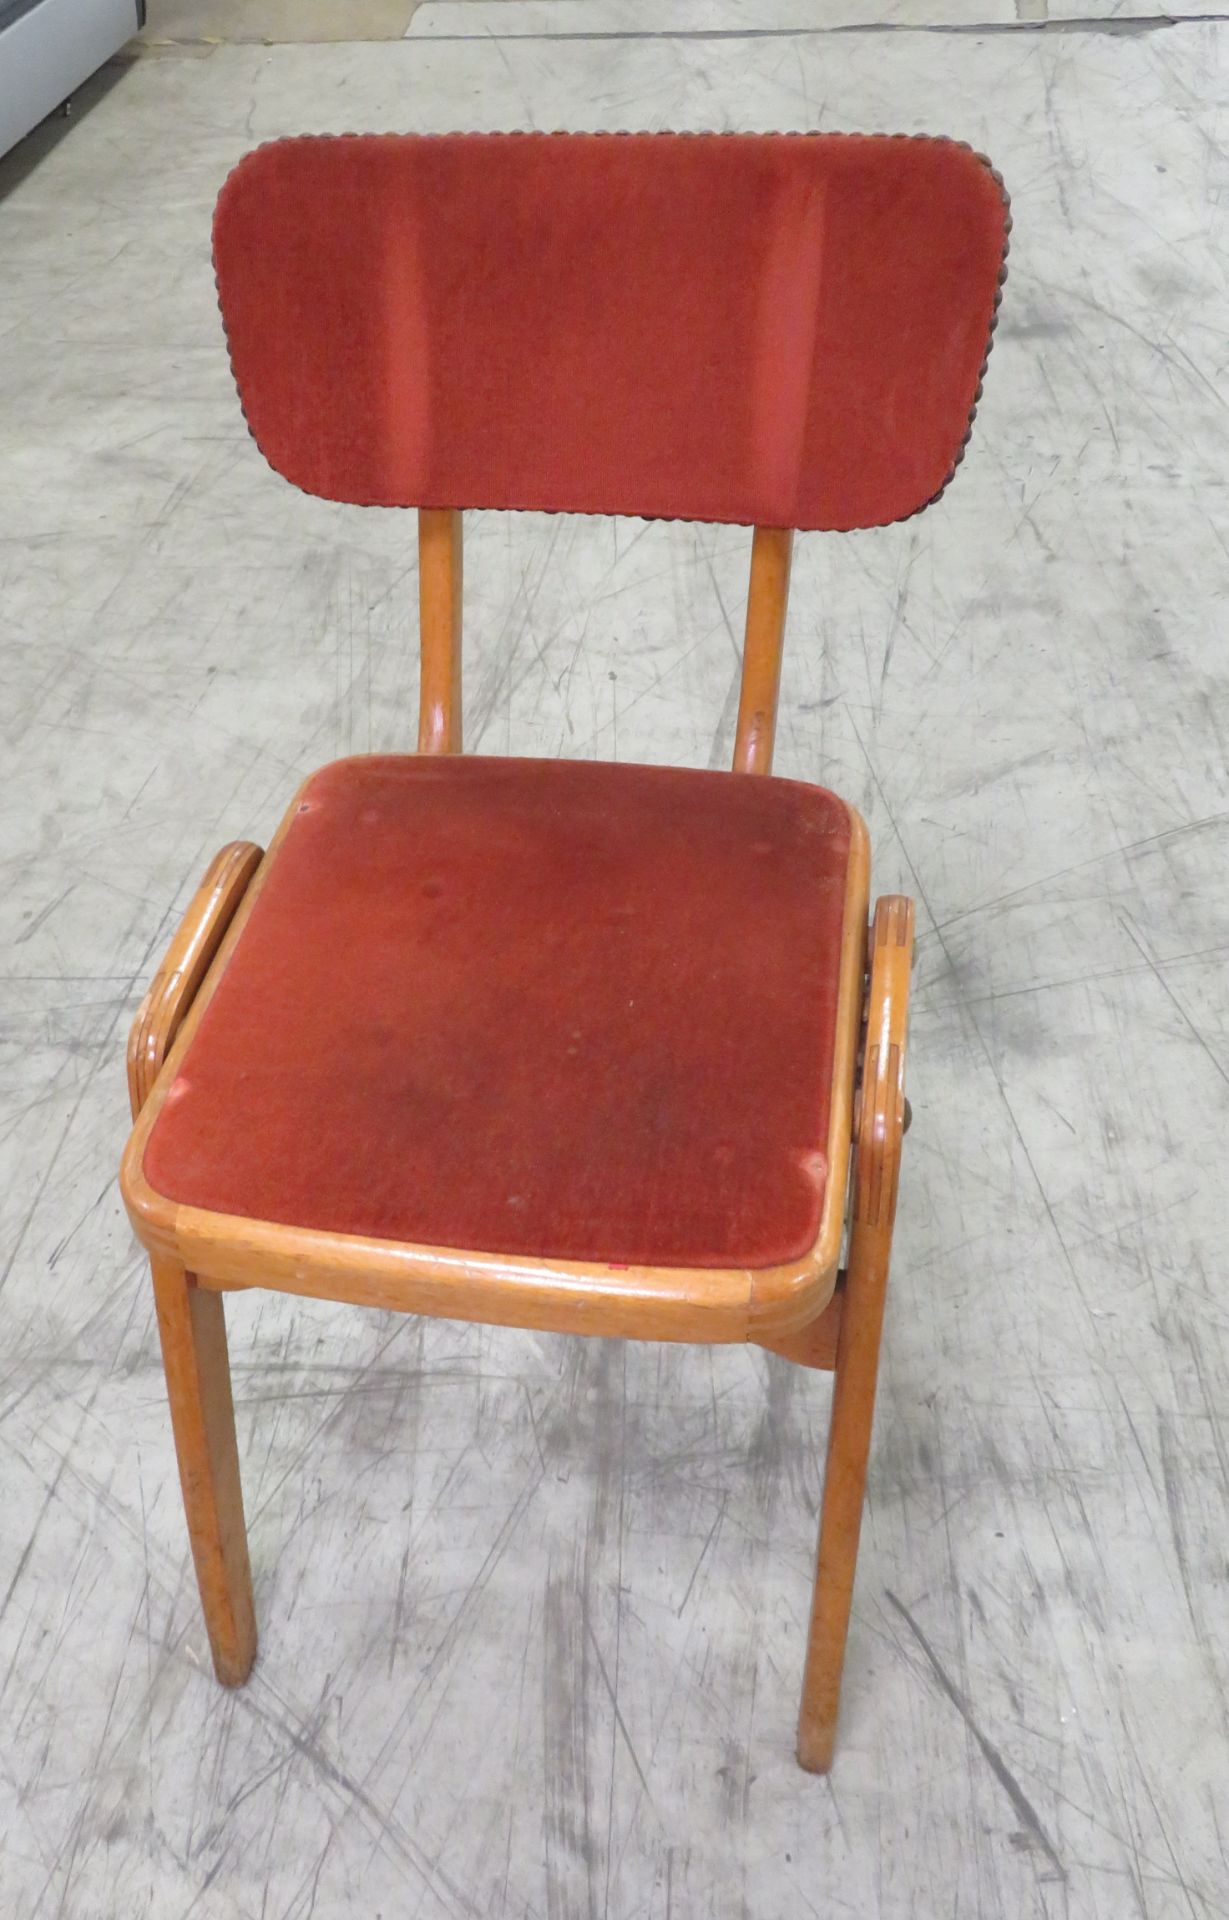 30x Chair with padded seats - seat height 45cm - Image 3 of 4